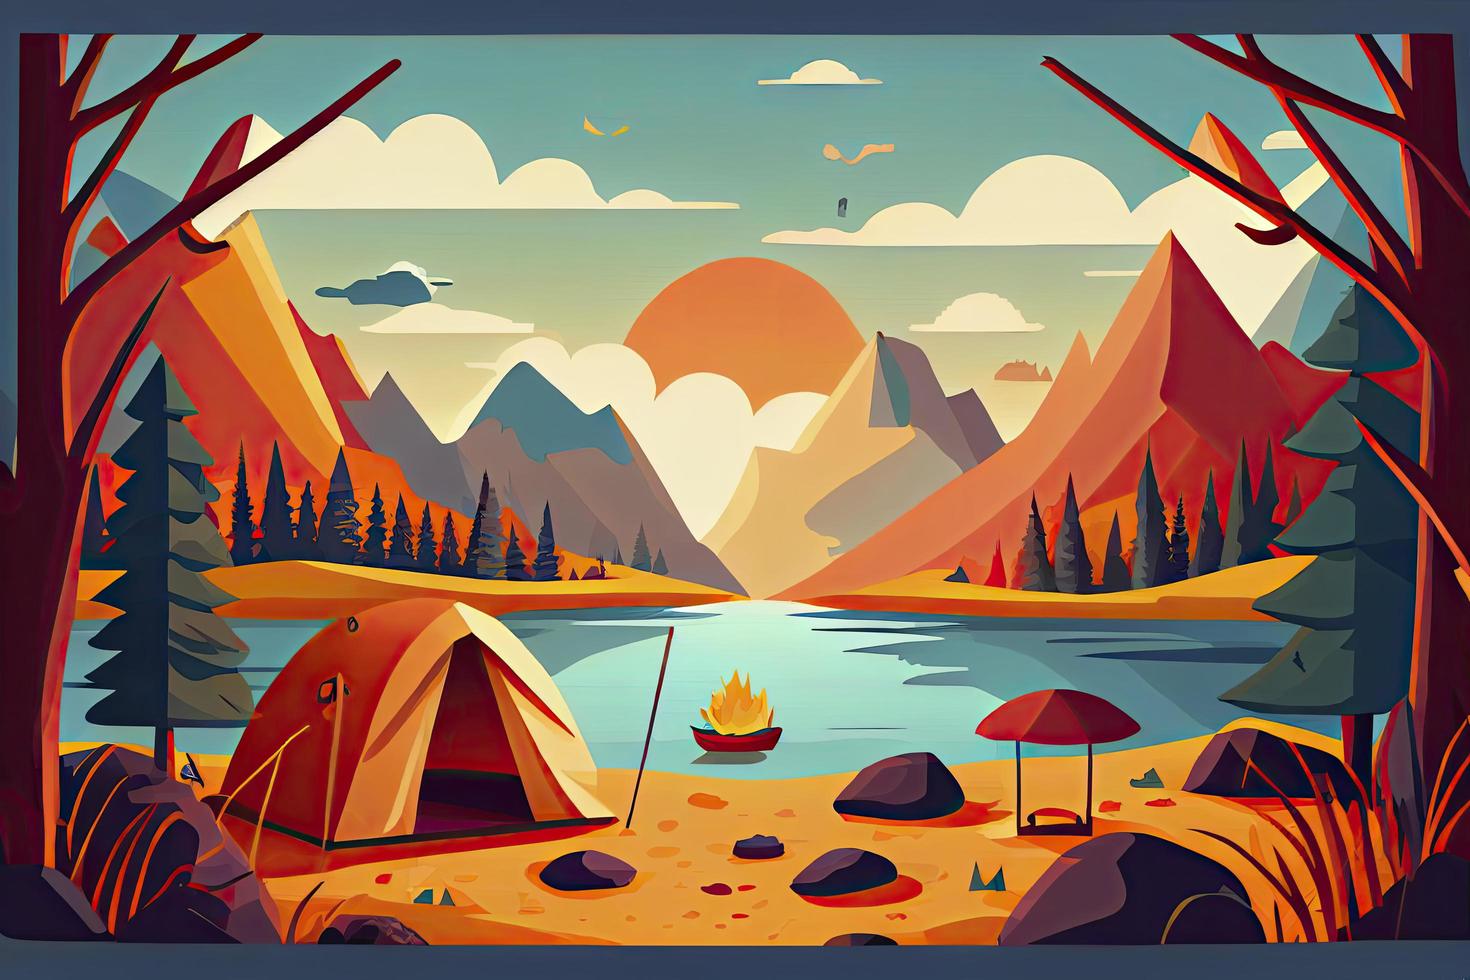 Sunny day landscape illustration in flat style with tent, campfire, mountains, forest and water. Background for summer camp, nature tourism, camping or hiking design concept photo